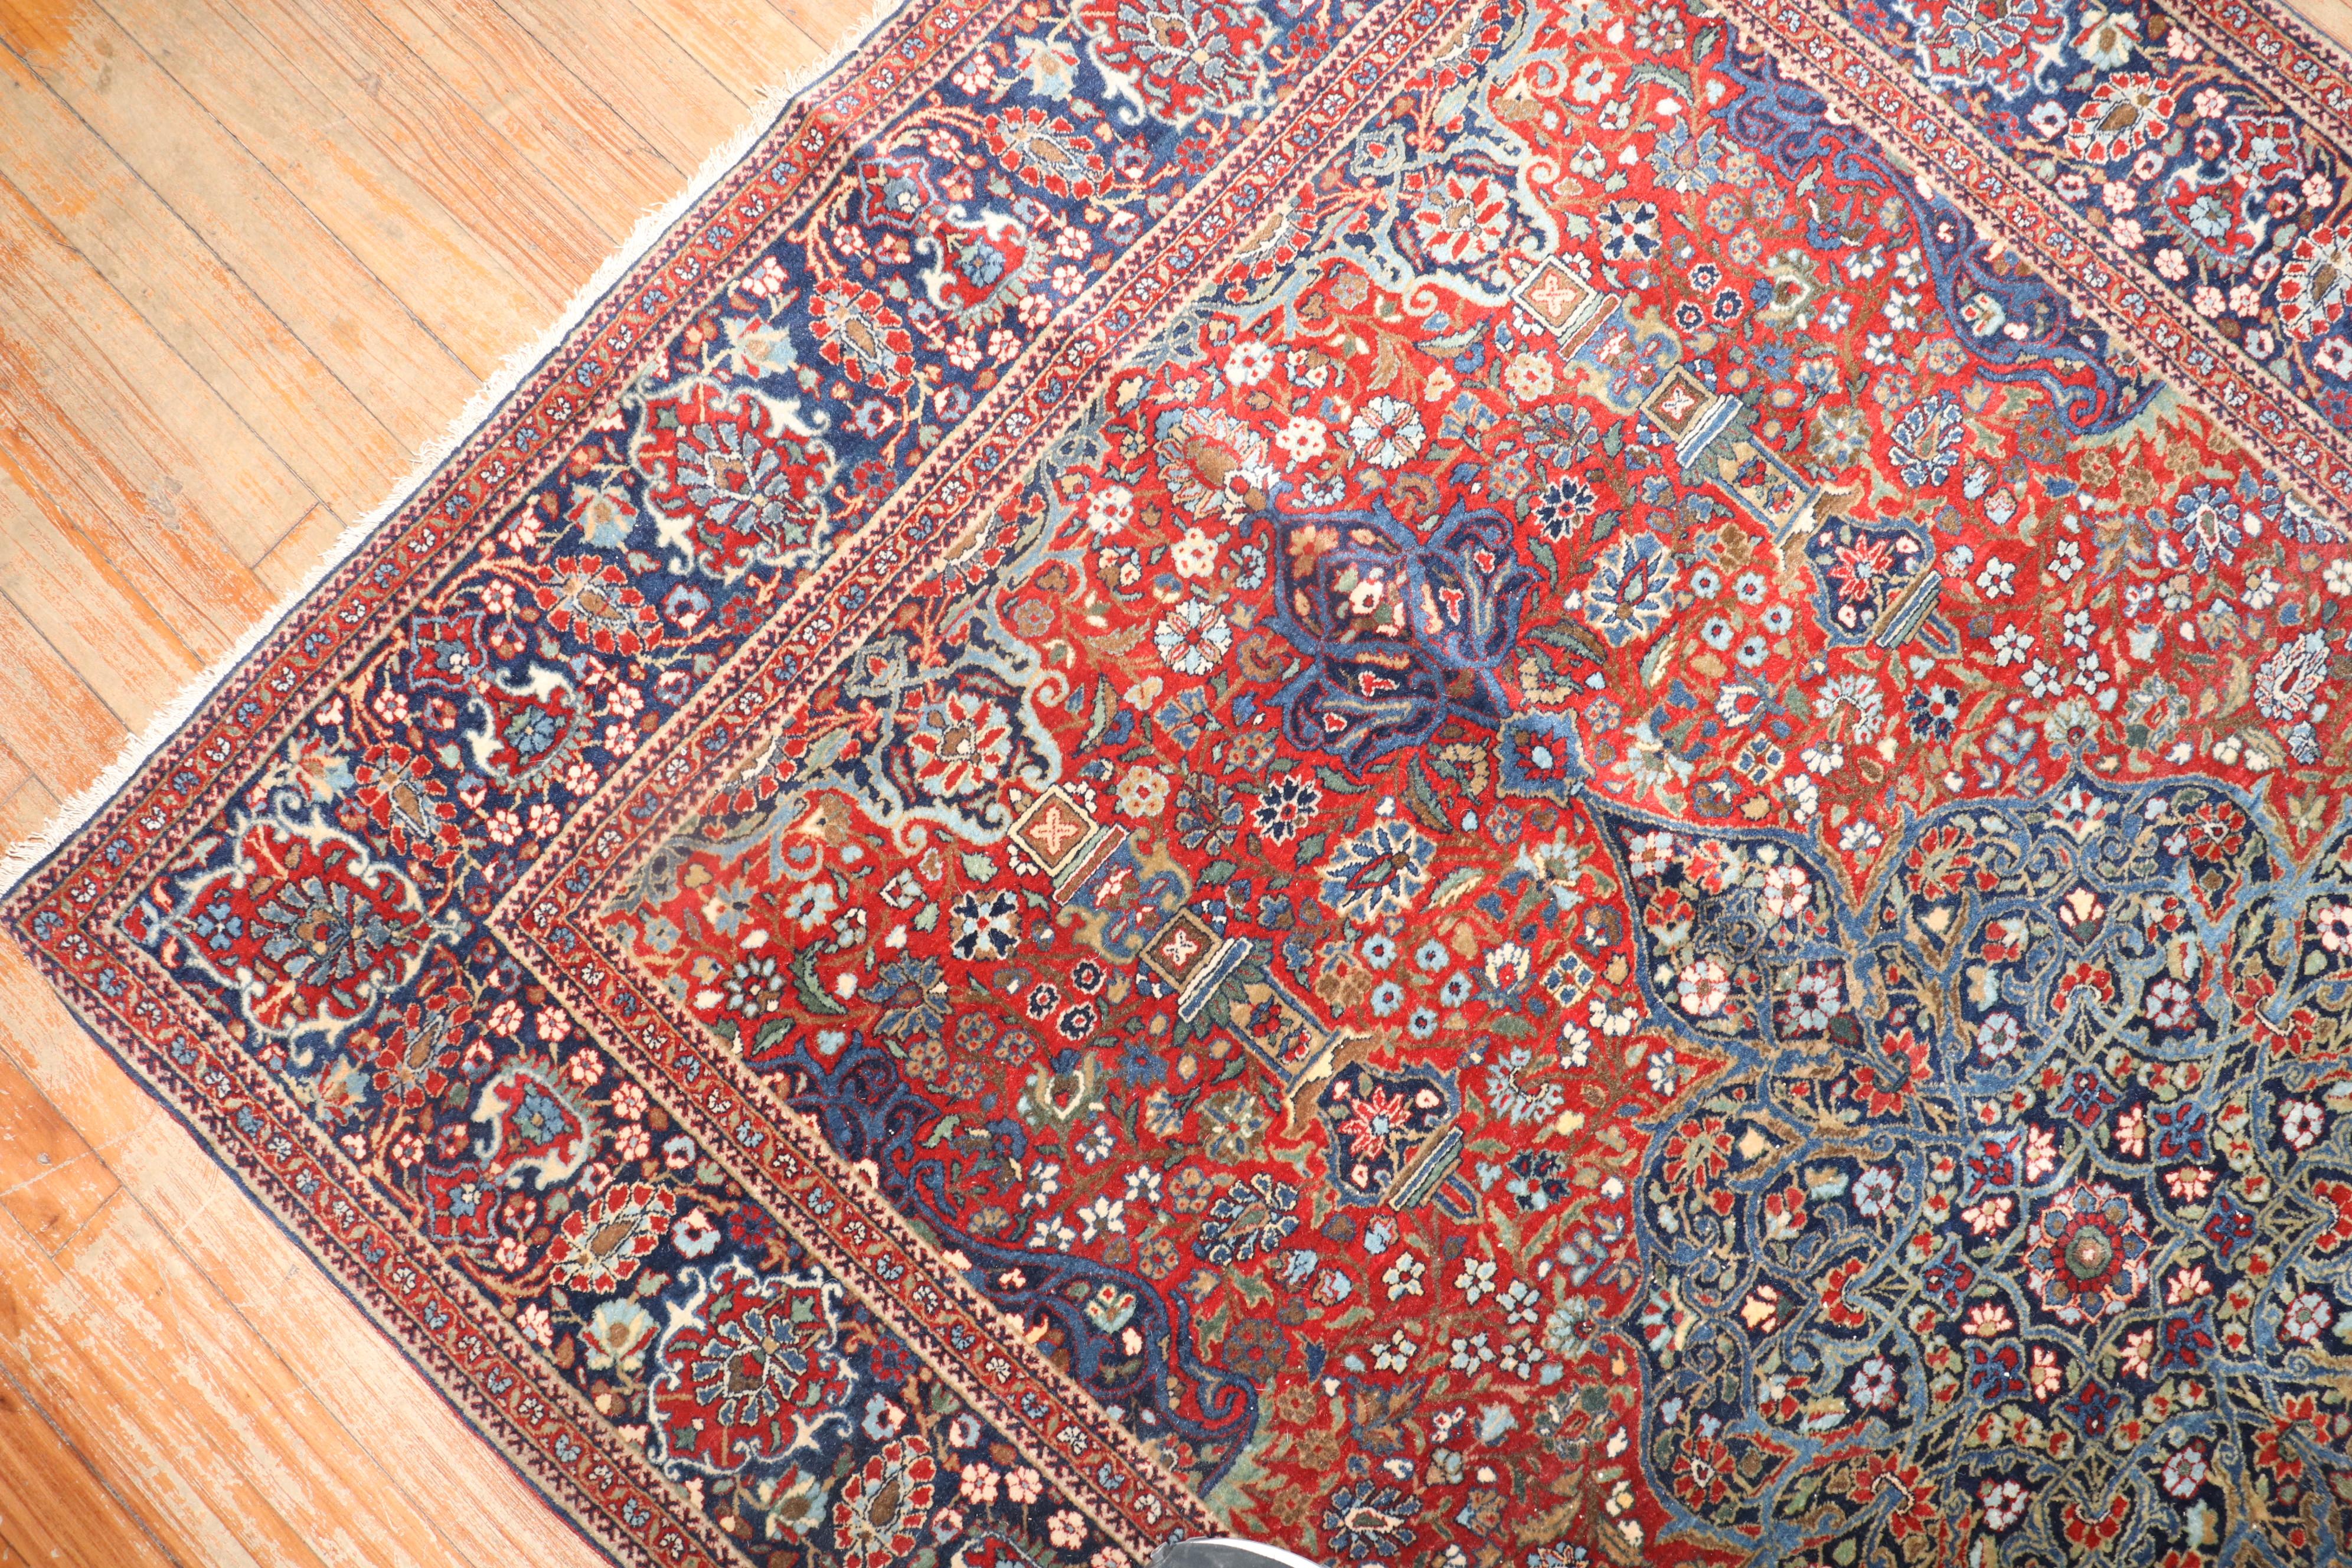 Collector Level Antique Persian Kashan Rug 2